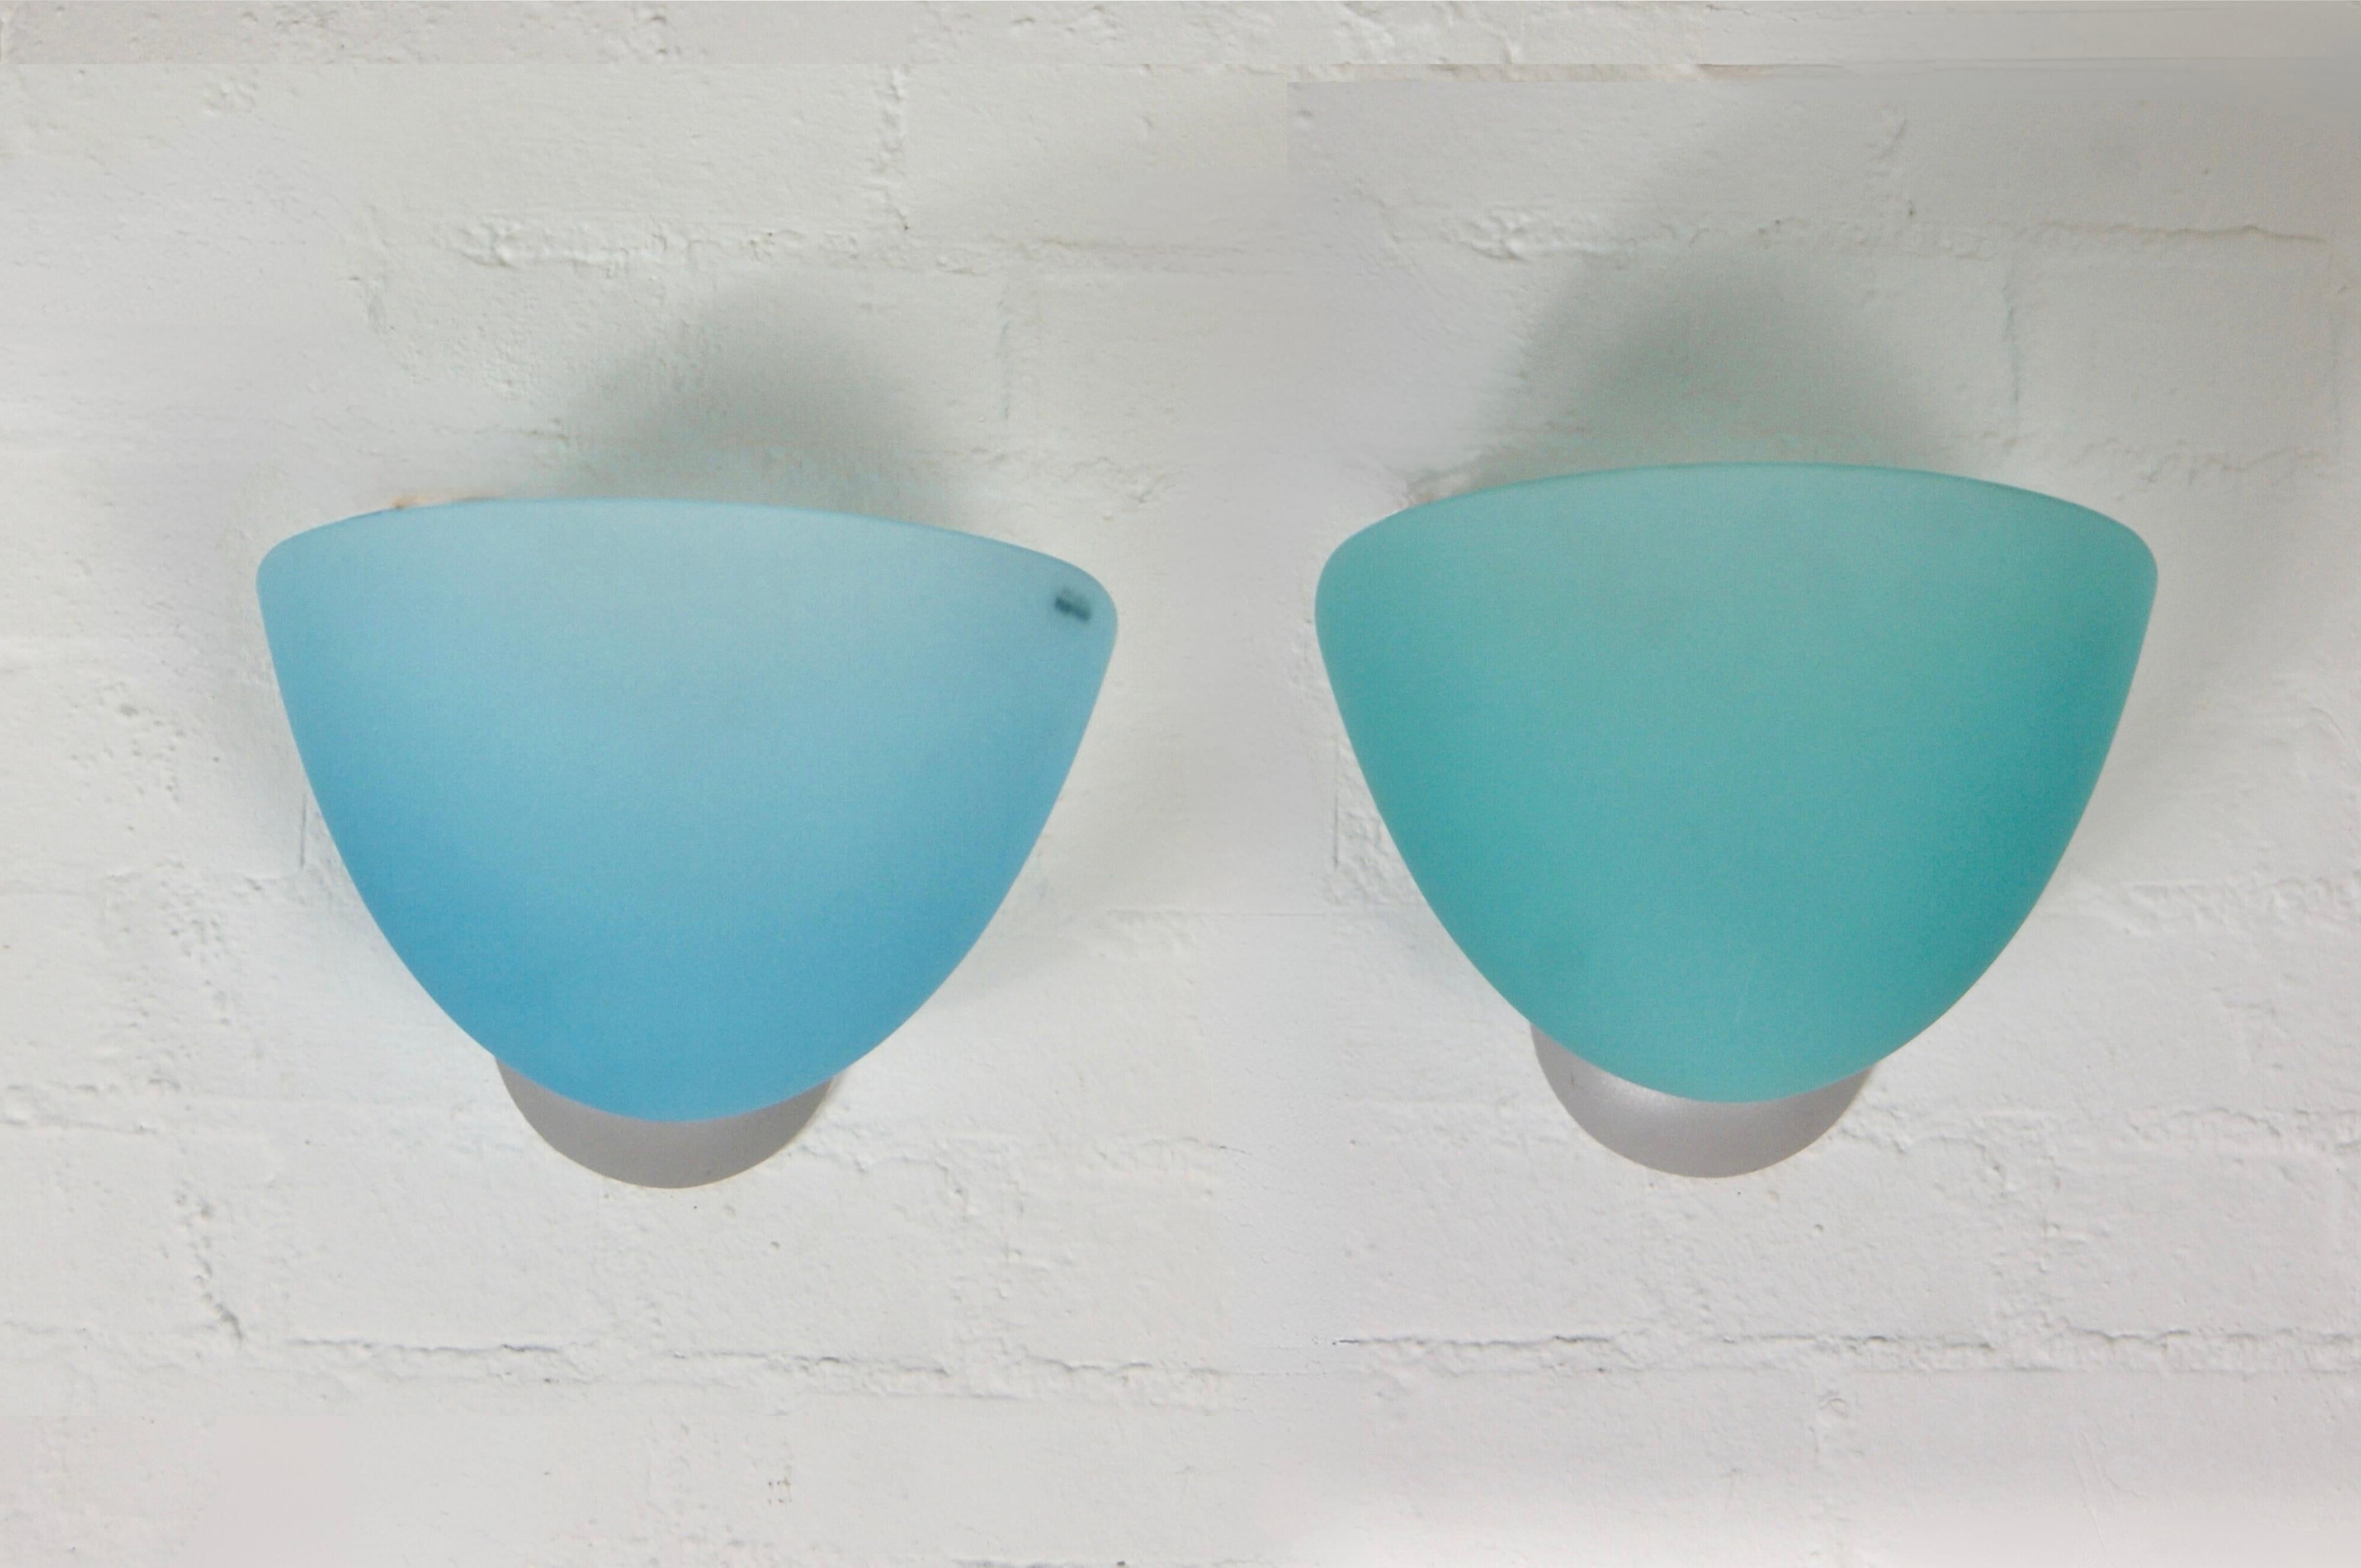 Pair of labeled Italian glass wall sconces by AV MAZZEGA Murano, circa 1980s.
Beautiful mezza luna wall lamps
With 3/4 globe frosted glass diffusers in colour marine blue.
There are slight difference in the diffuser colours when not lit, however